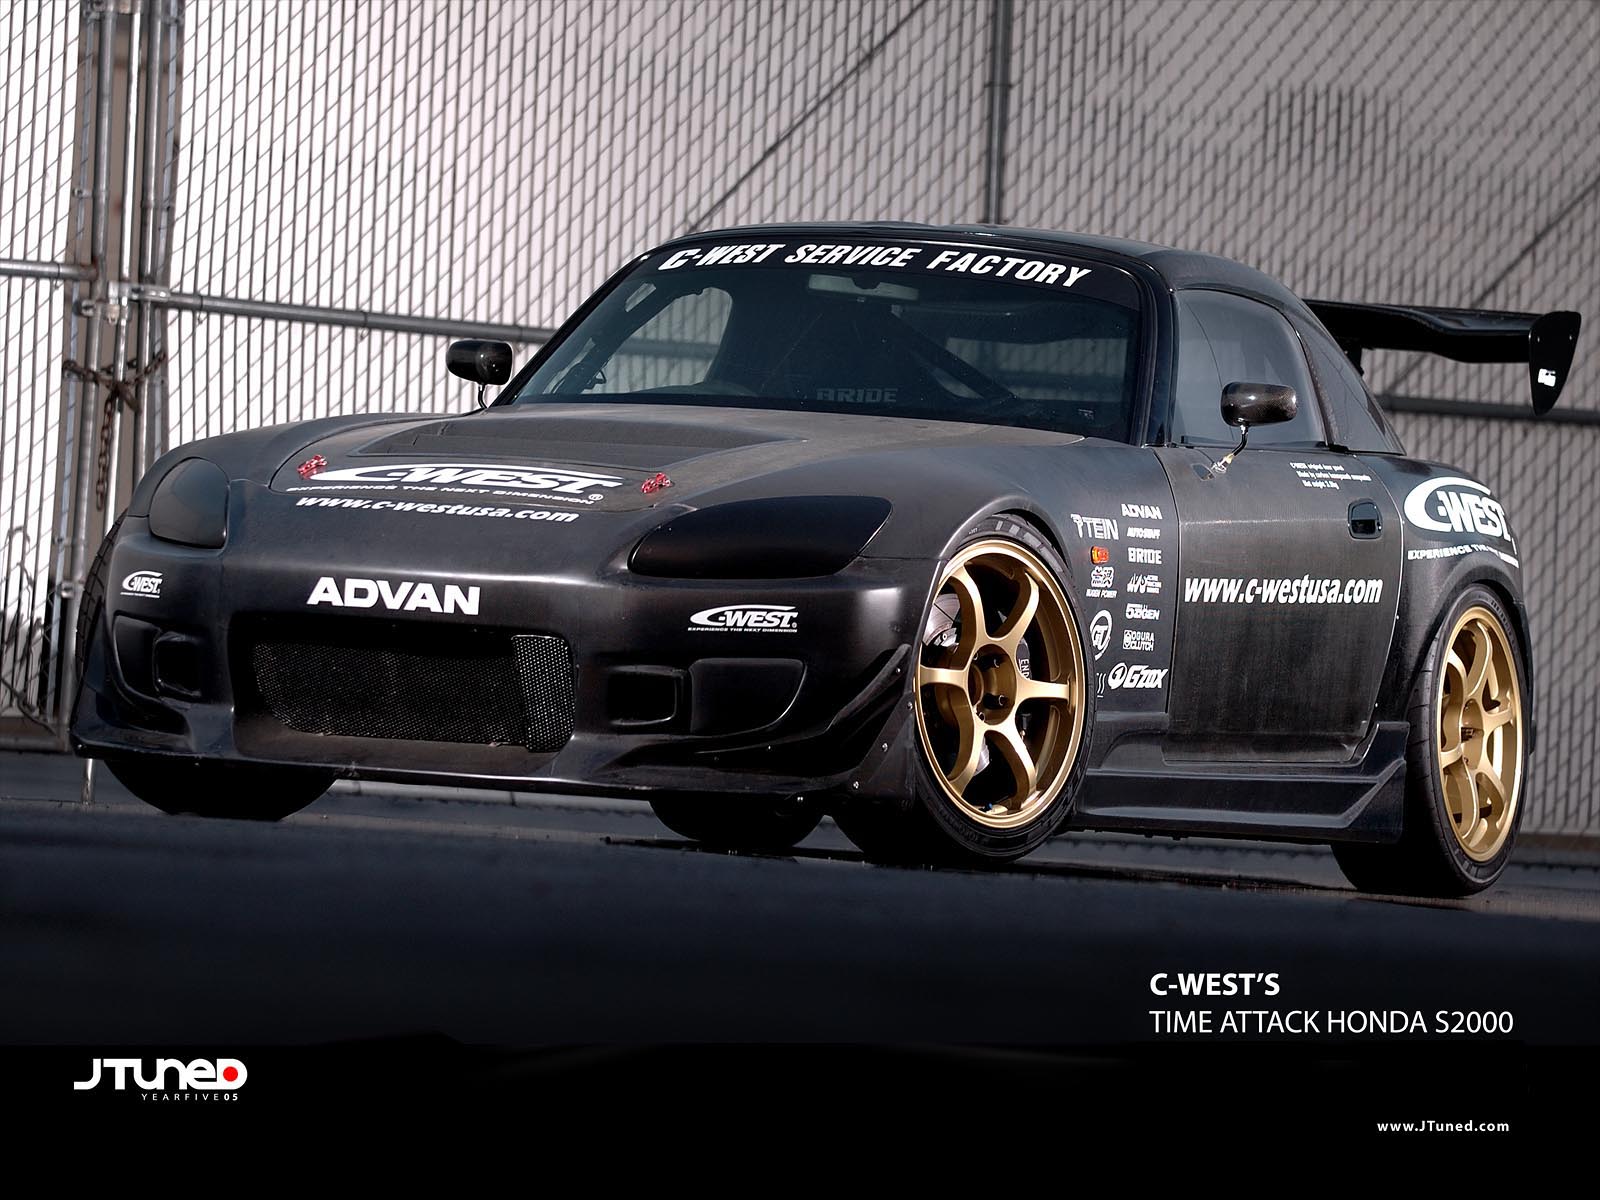 C West Time Attack S2K Wallpaper.com Gallery